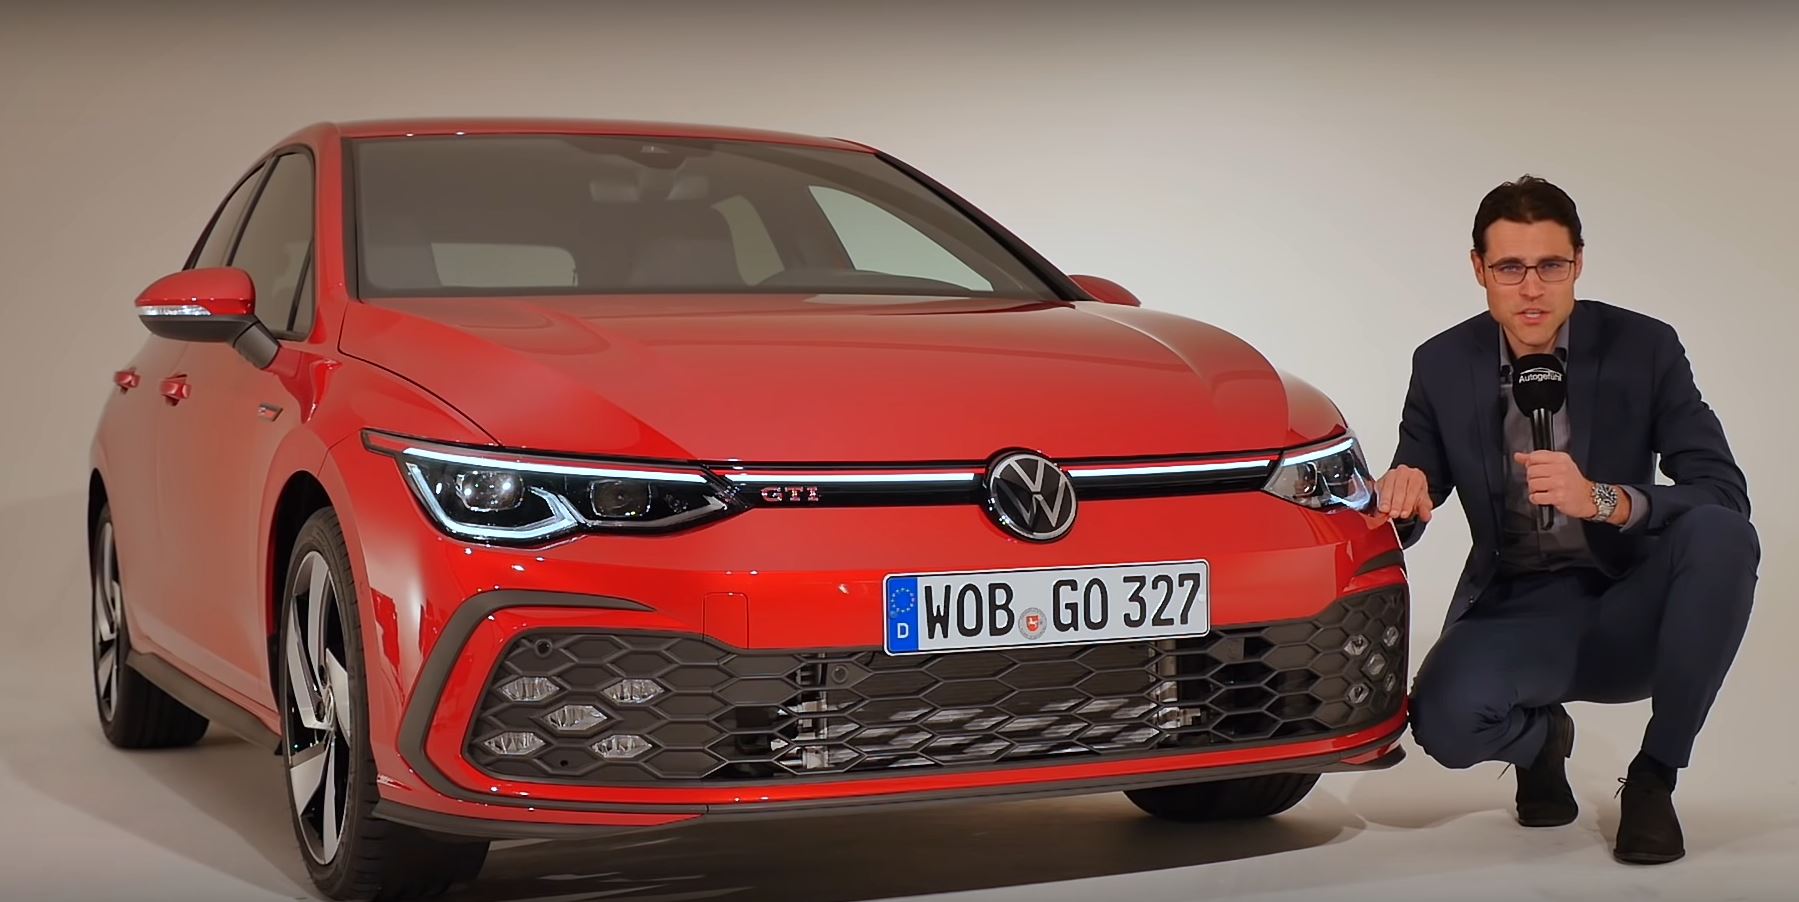 2021 Volkswagen Golf 8 GTI: Here Are the First Videos - autoevolution